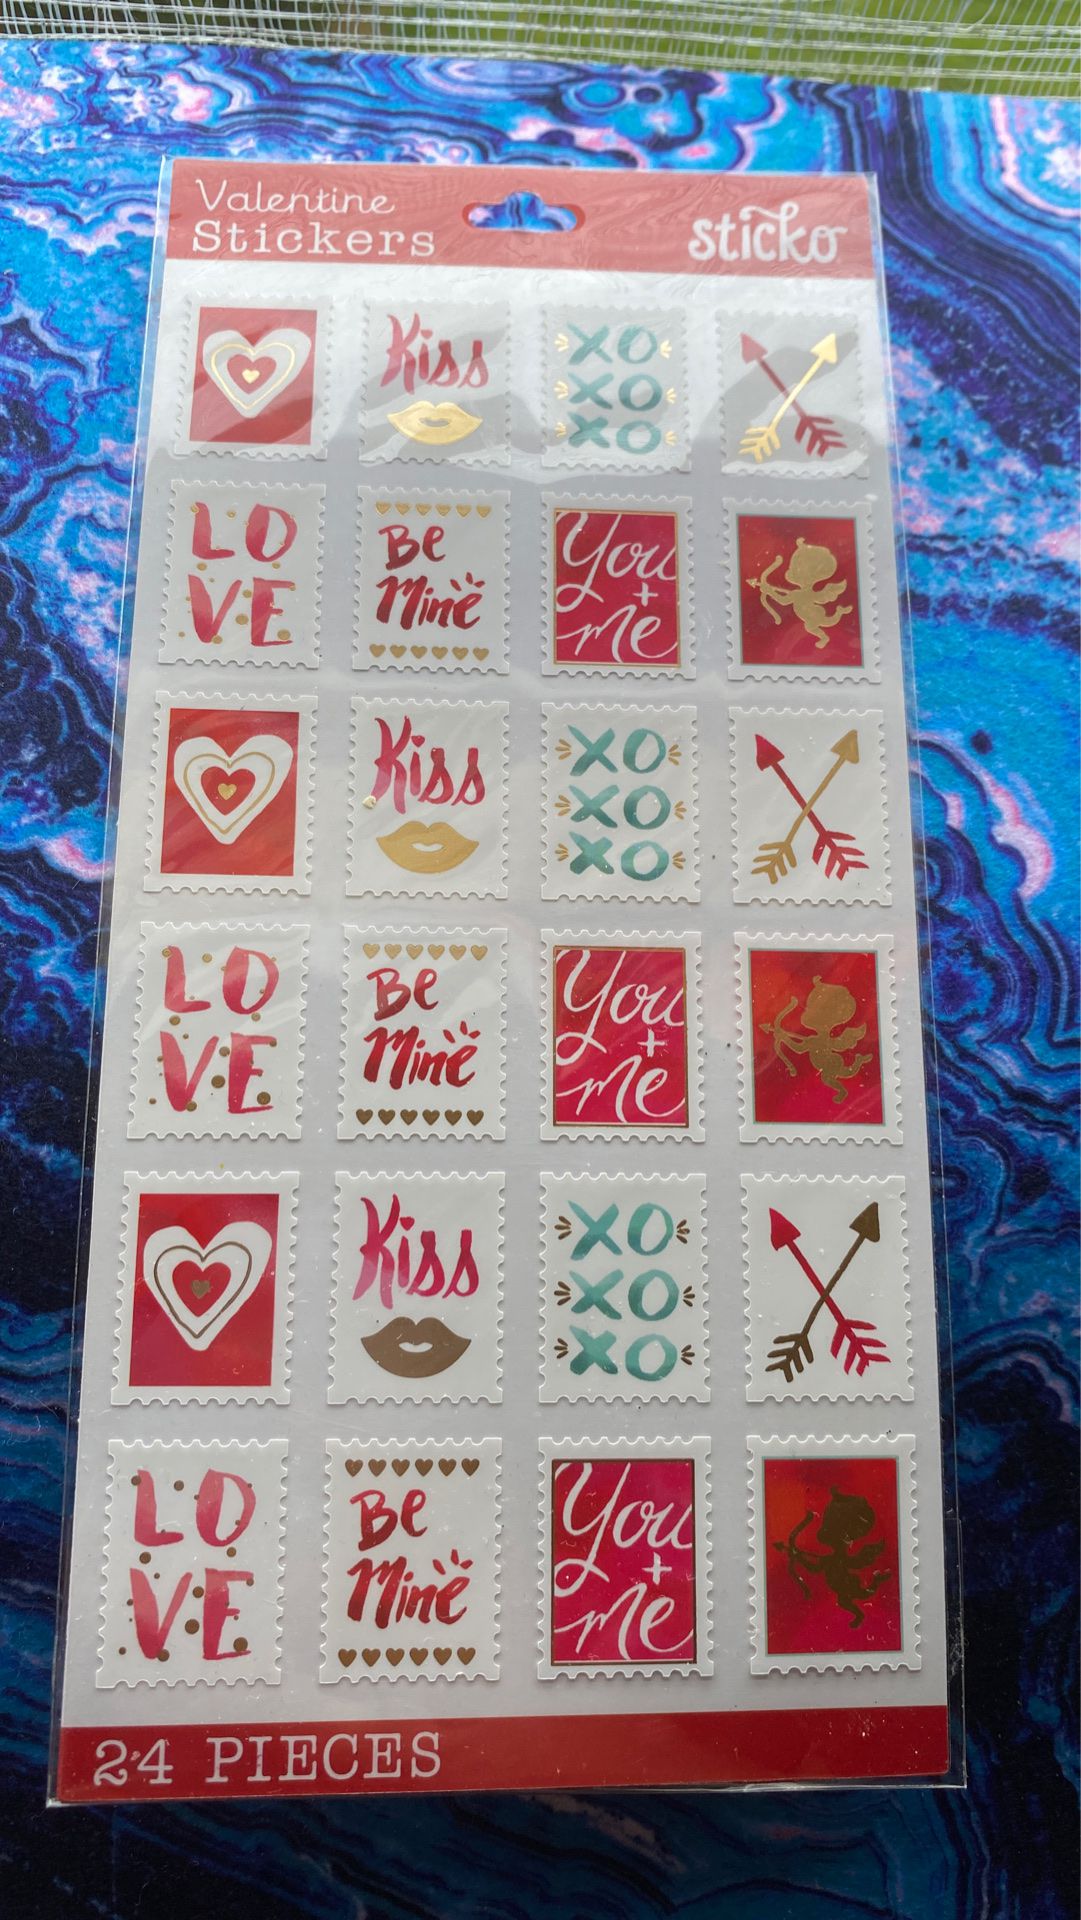 Valentine postage stickers and red envelopes